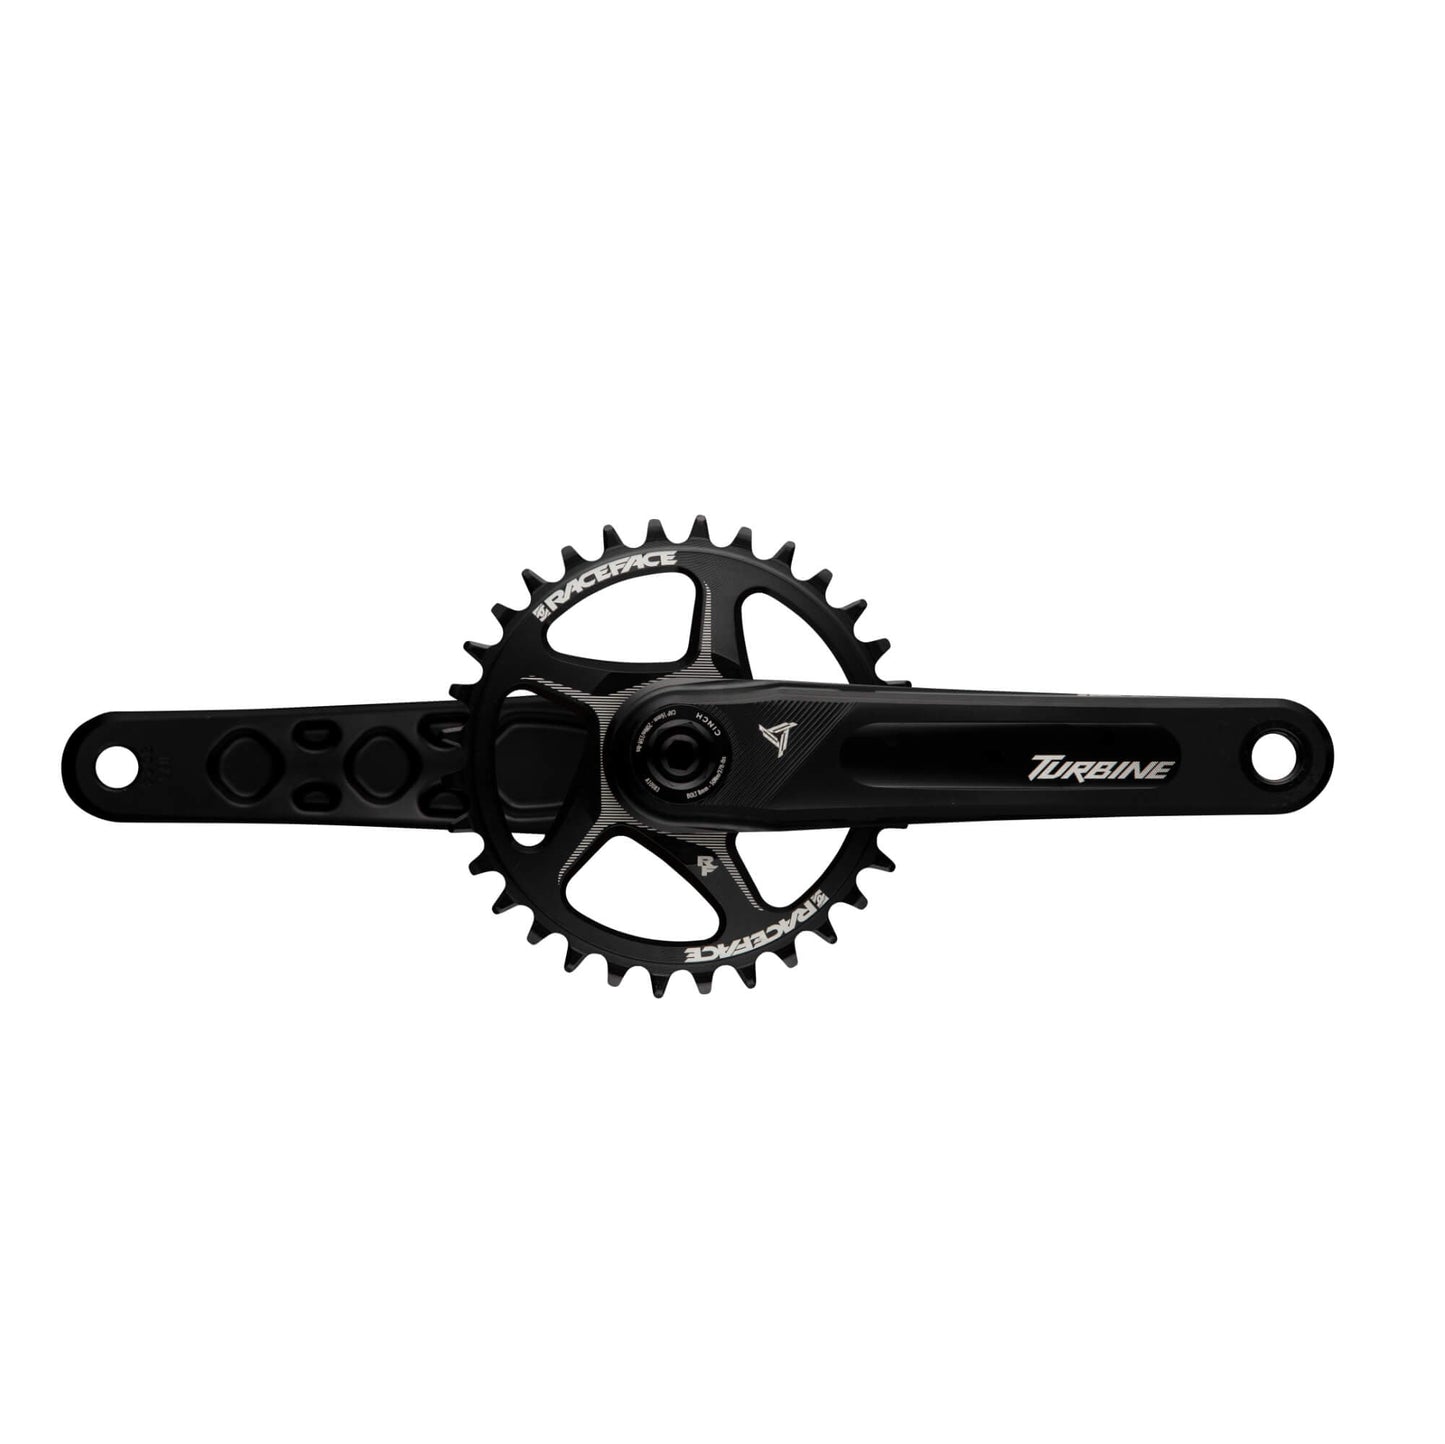 Race Face Turbine Cranks (Arms Only) 143mm Spindle Size - 165mm Length (55.5mm chainline)